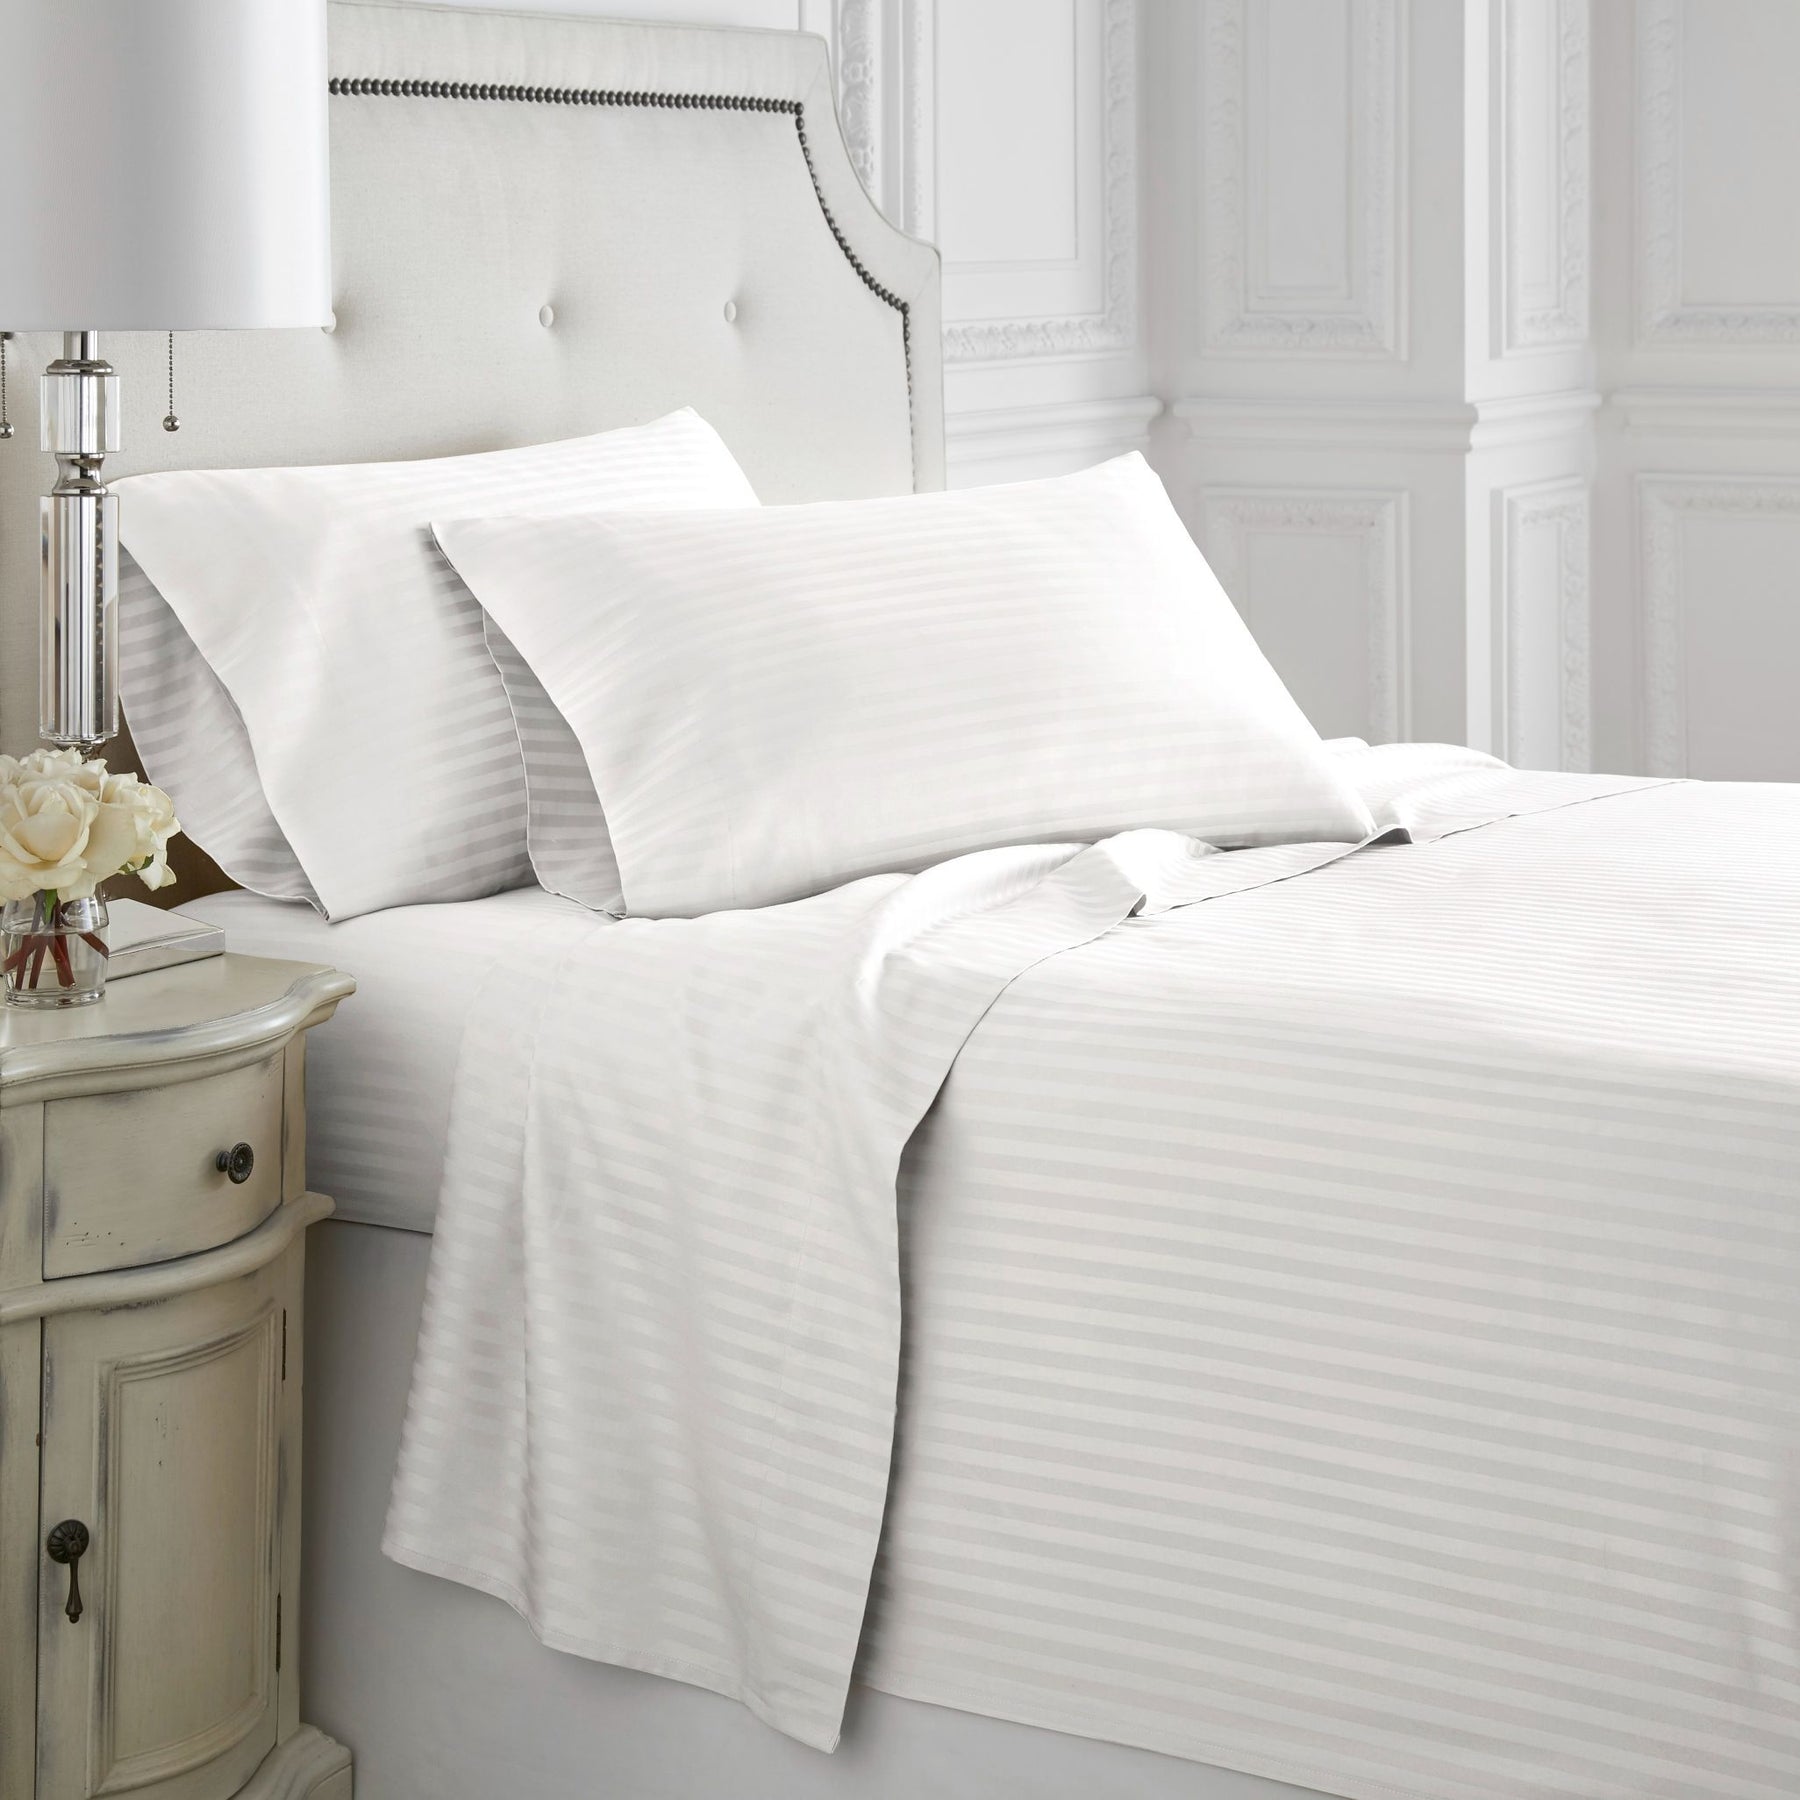 600 Thread Count Egyptian Cotton Sheets | Buy Online | REB